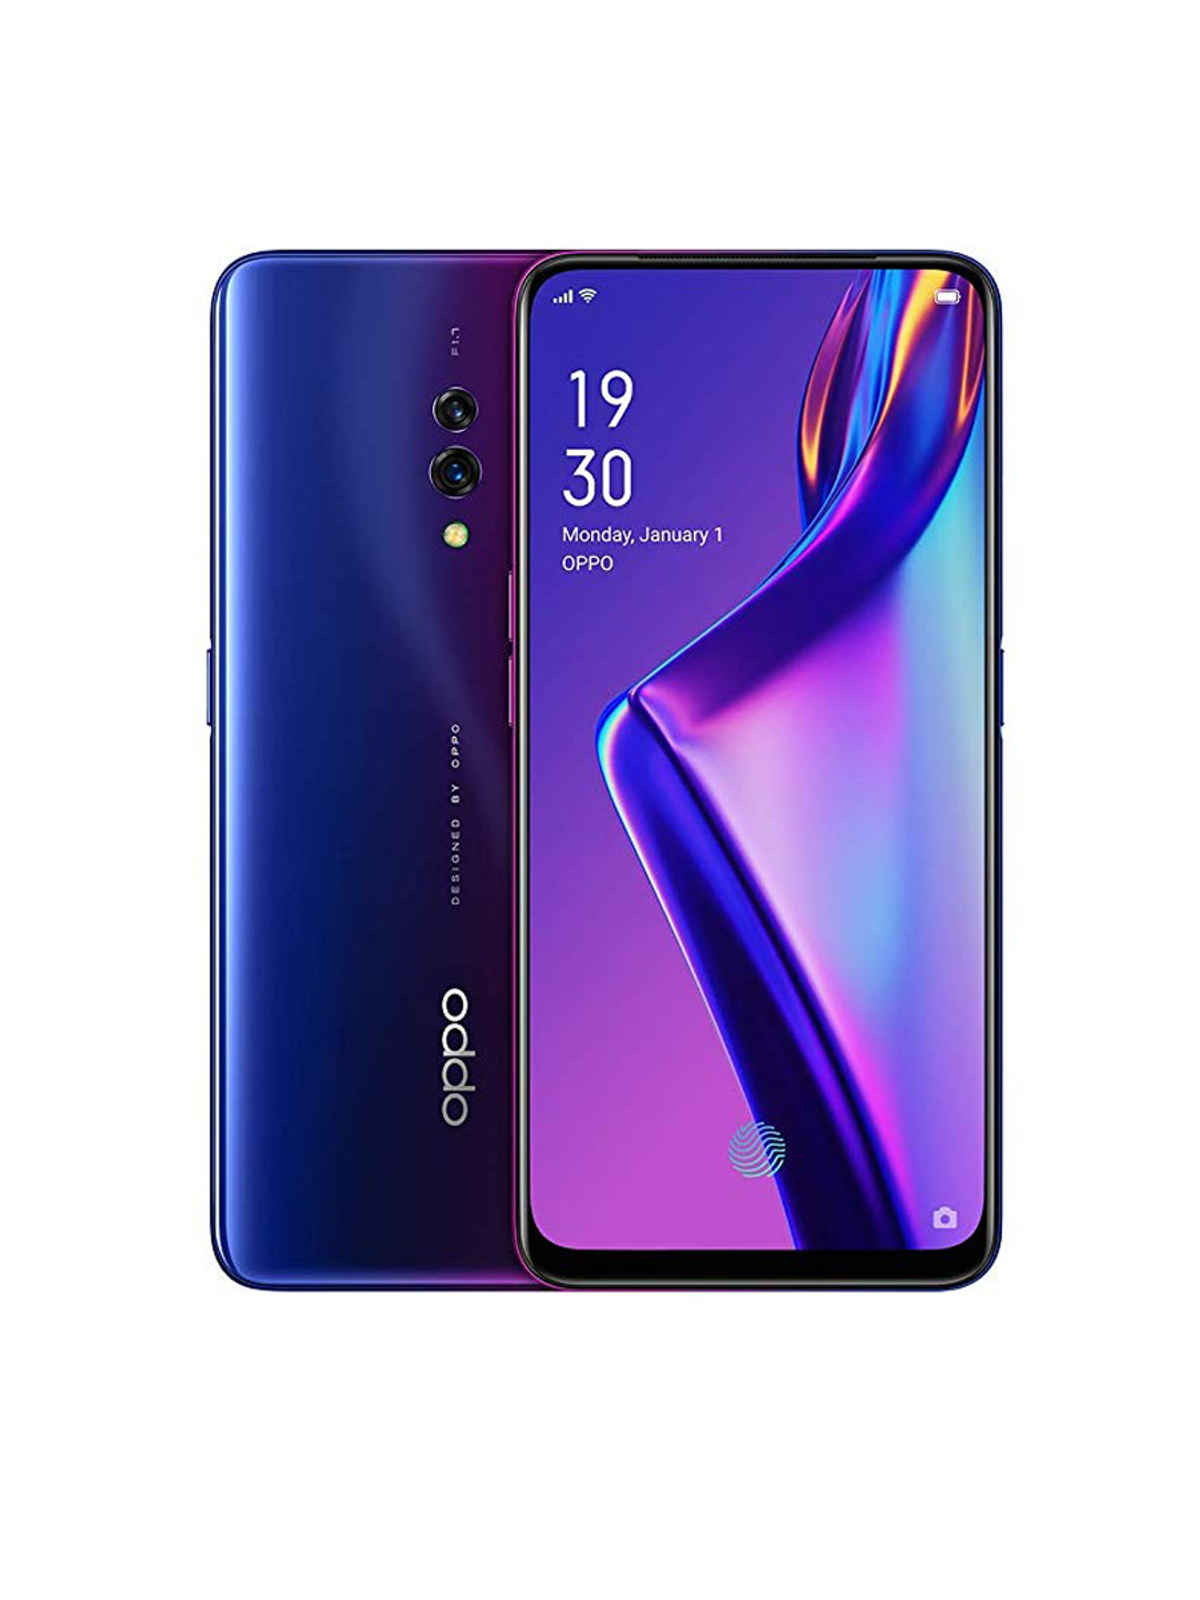 Oppo K3 64GB Price in India, Full Specifications & Features - 5th